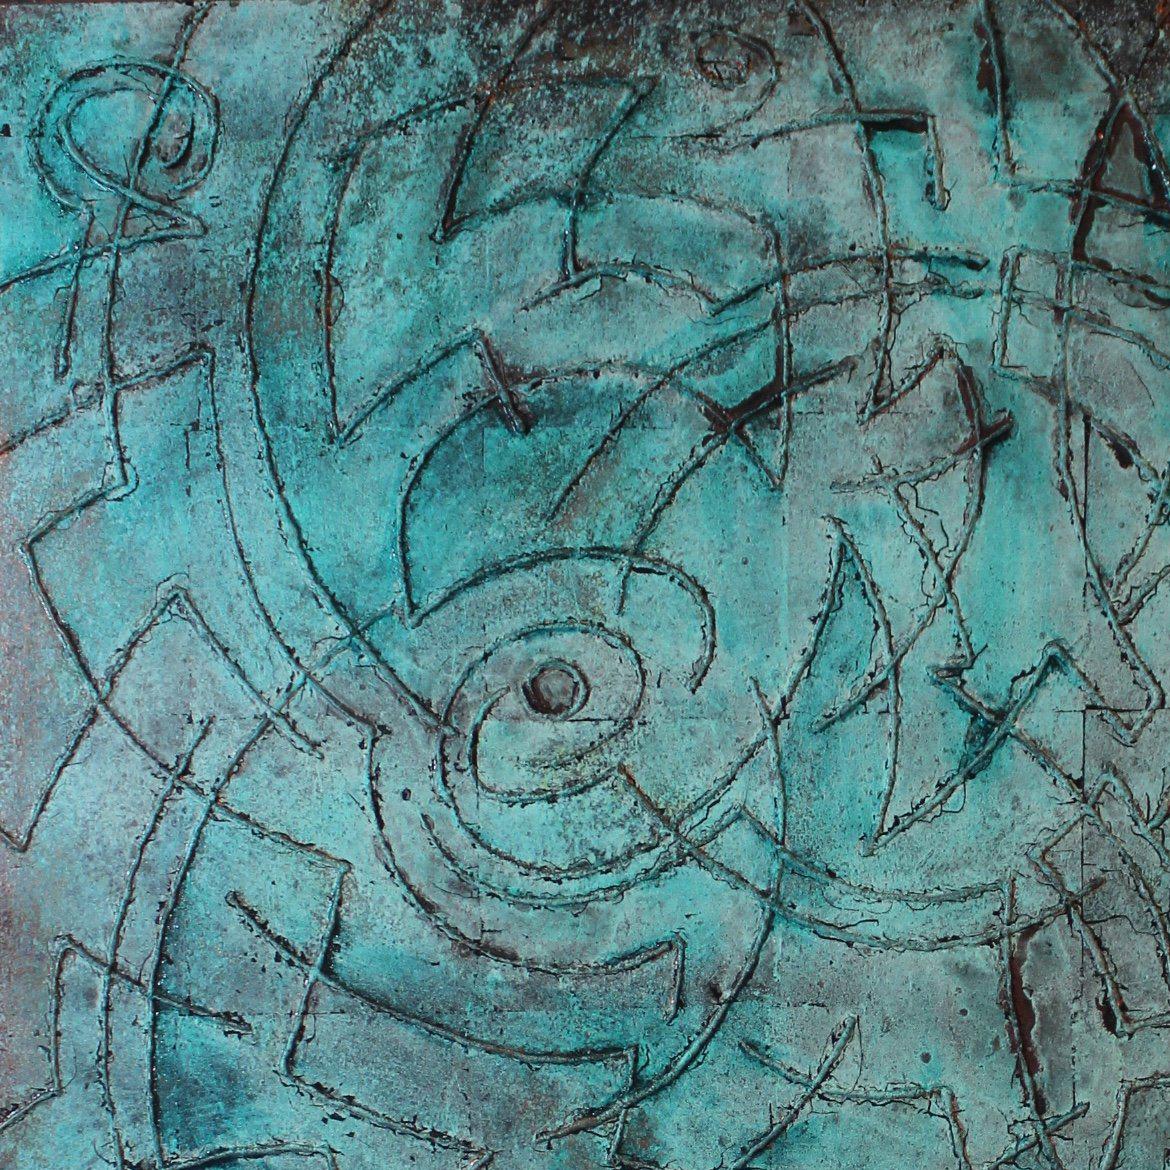 Blue Labyrinth - Abstract Geometric Mixed Media Art by Thomas Anderson